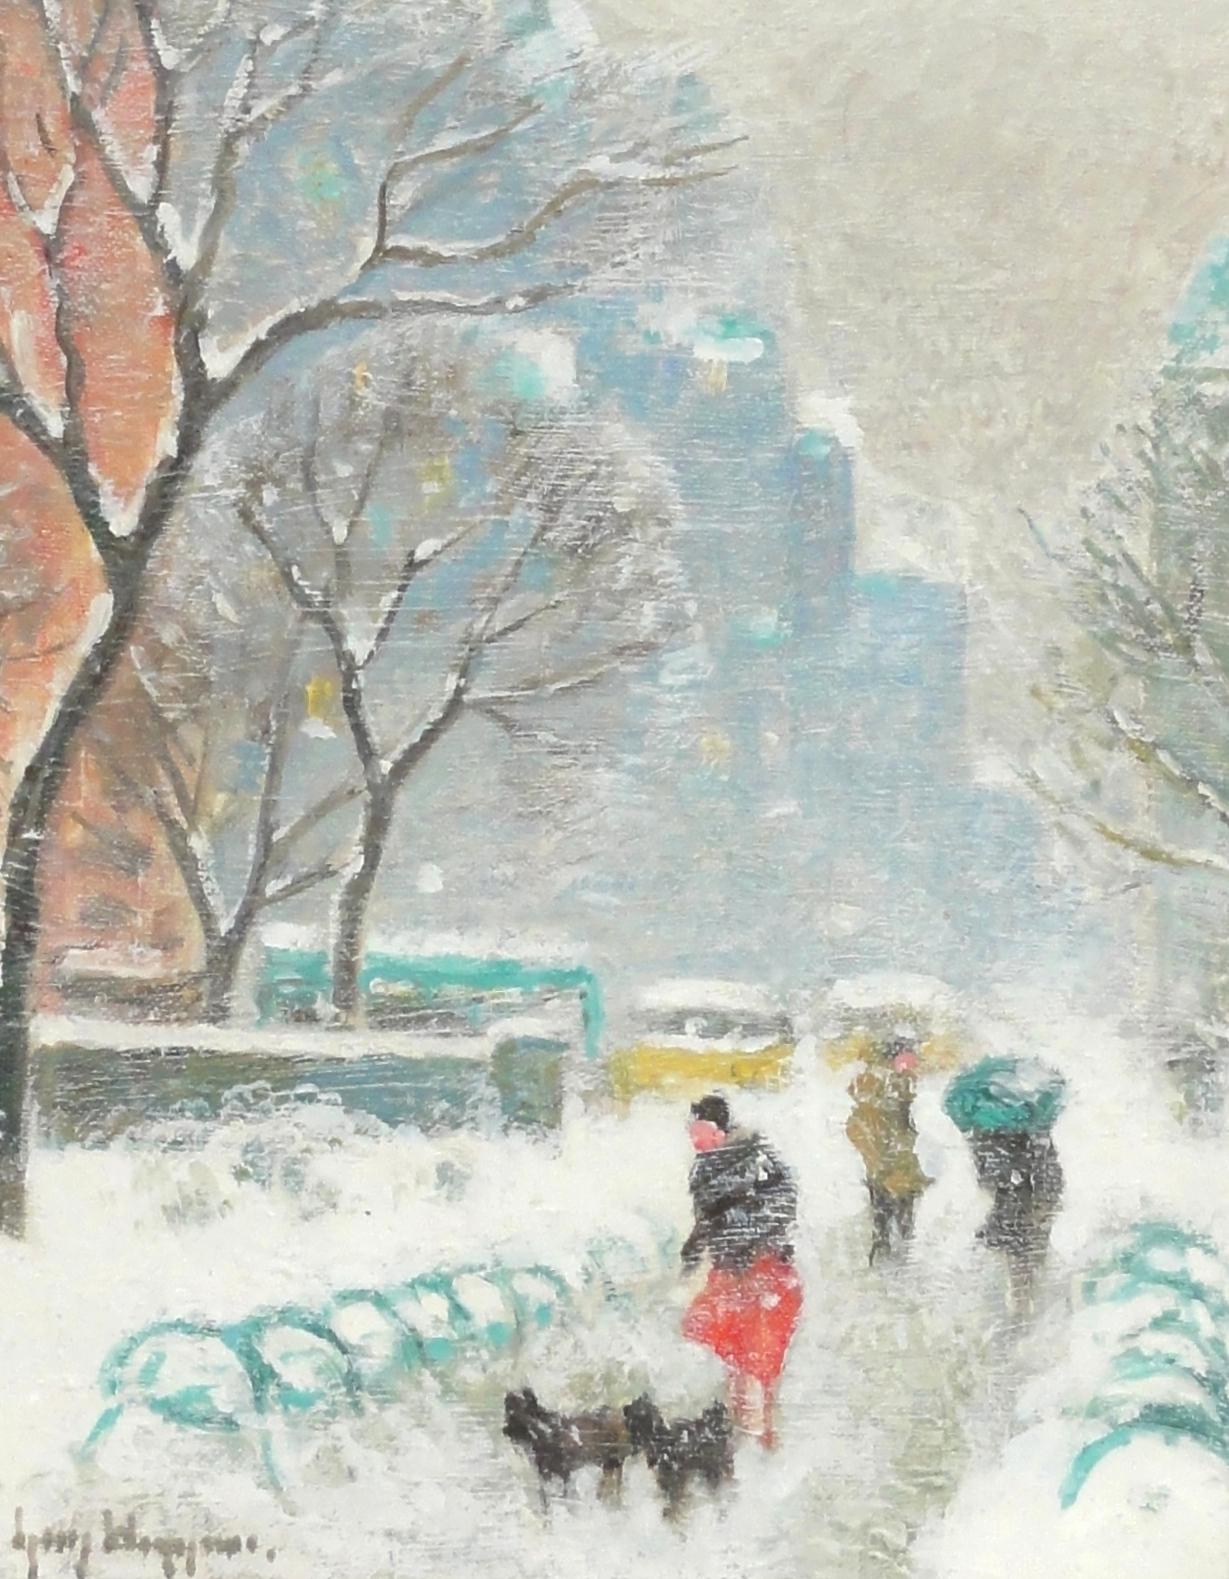 Winter in the Park - Painting by Guy Carleton Wiggins